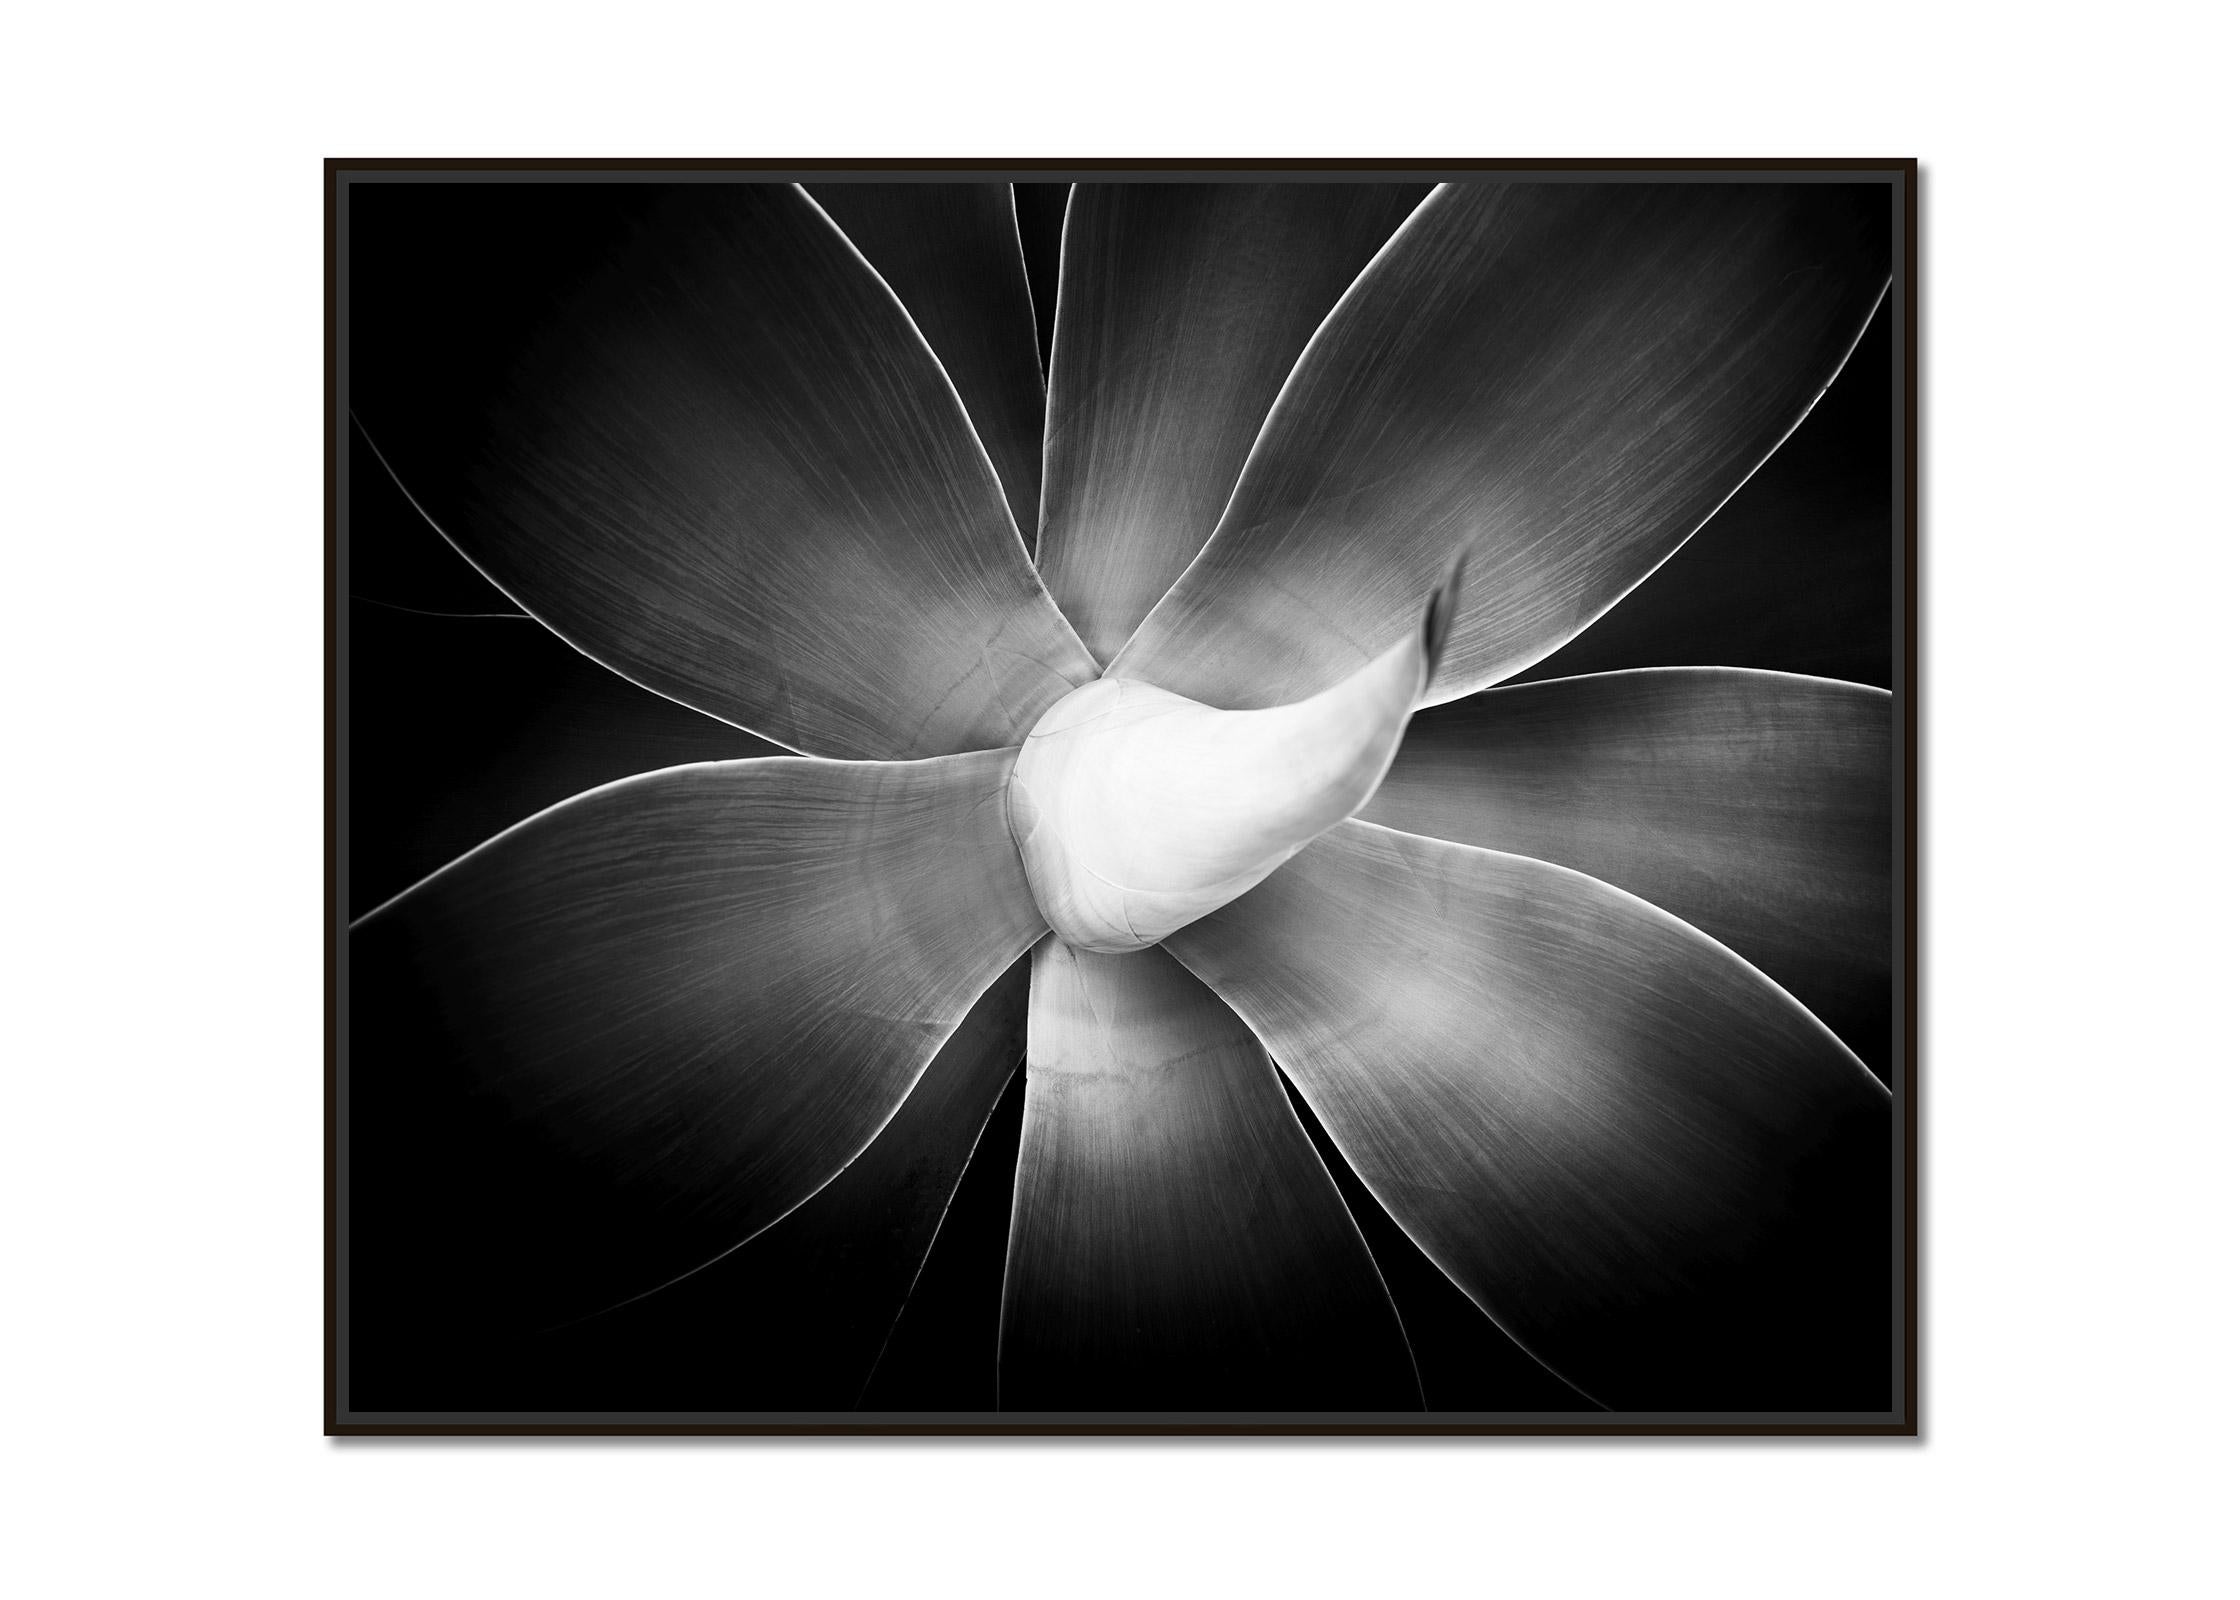 Agave attenuata, plant detail, Spain, black and white art photography, landscape - Photograph by Gerald Berghammer